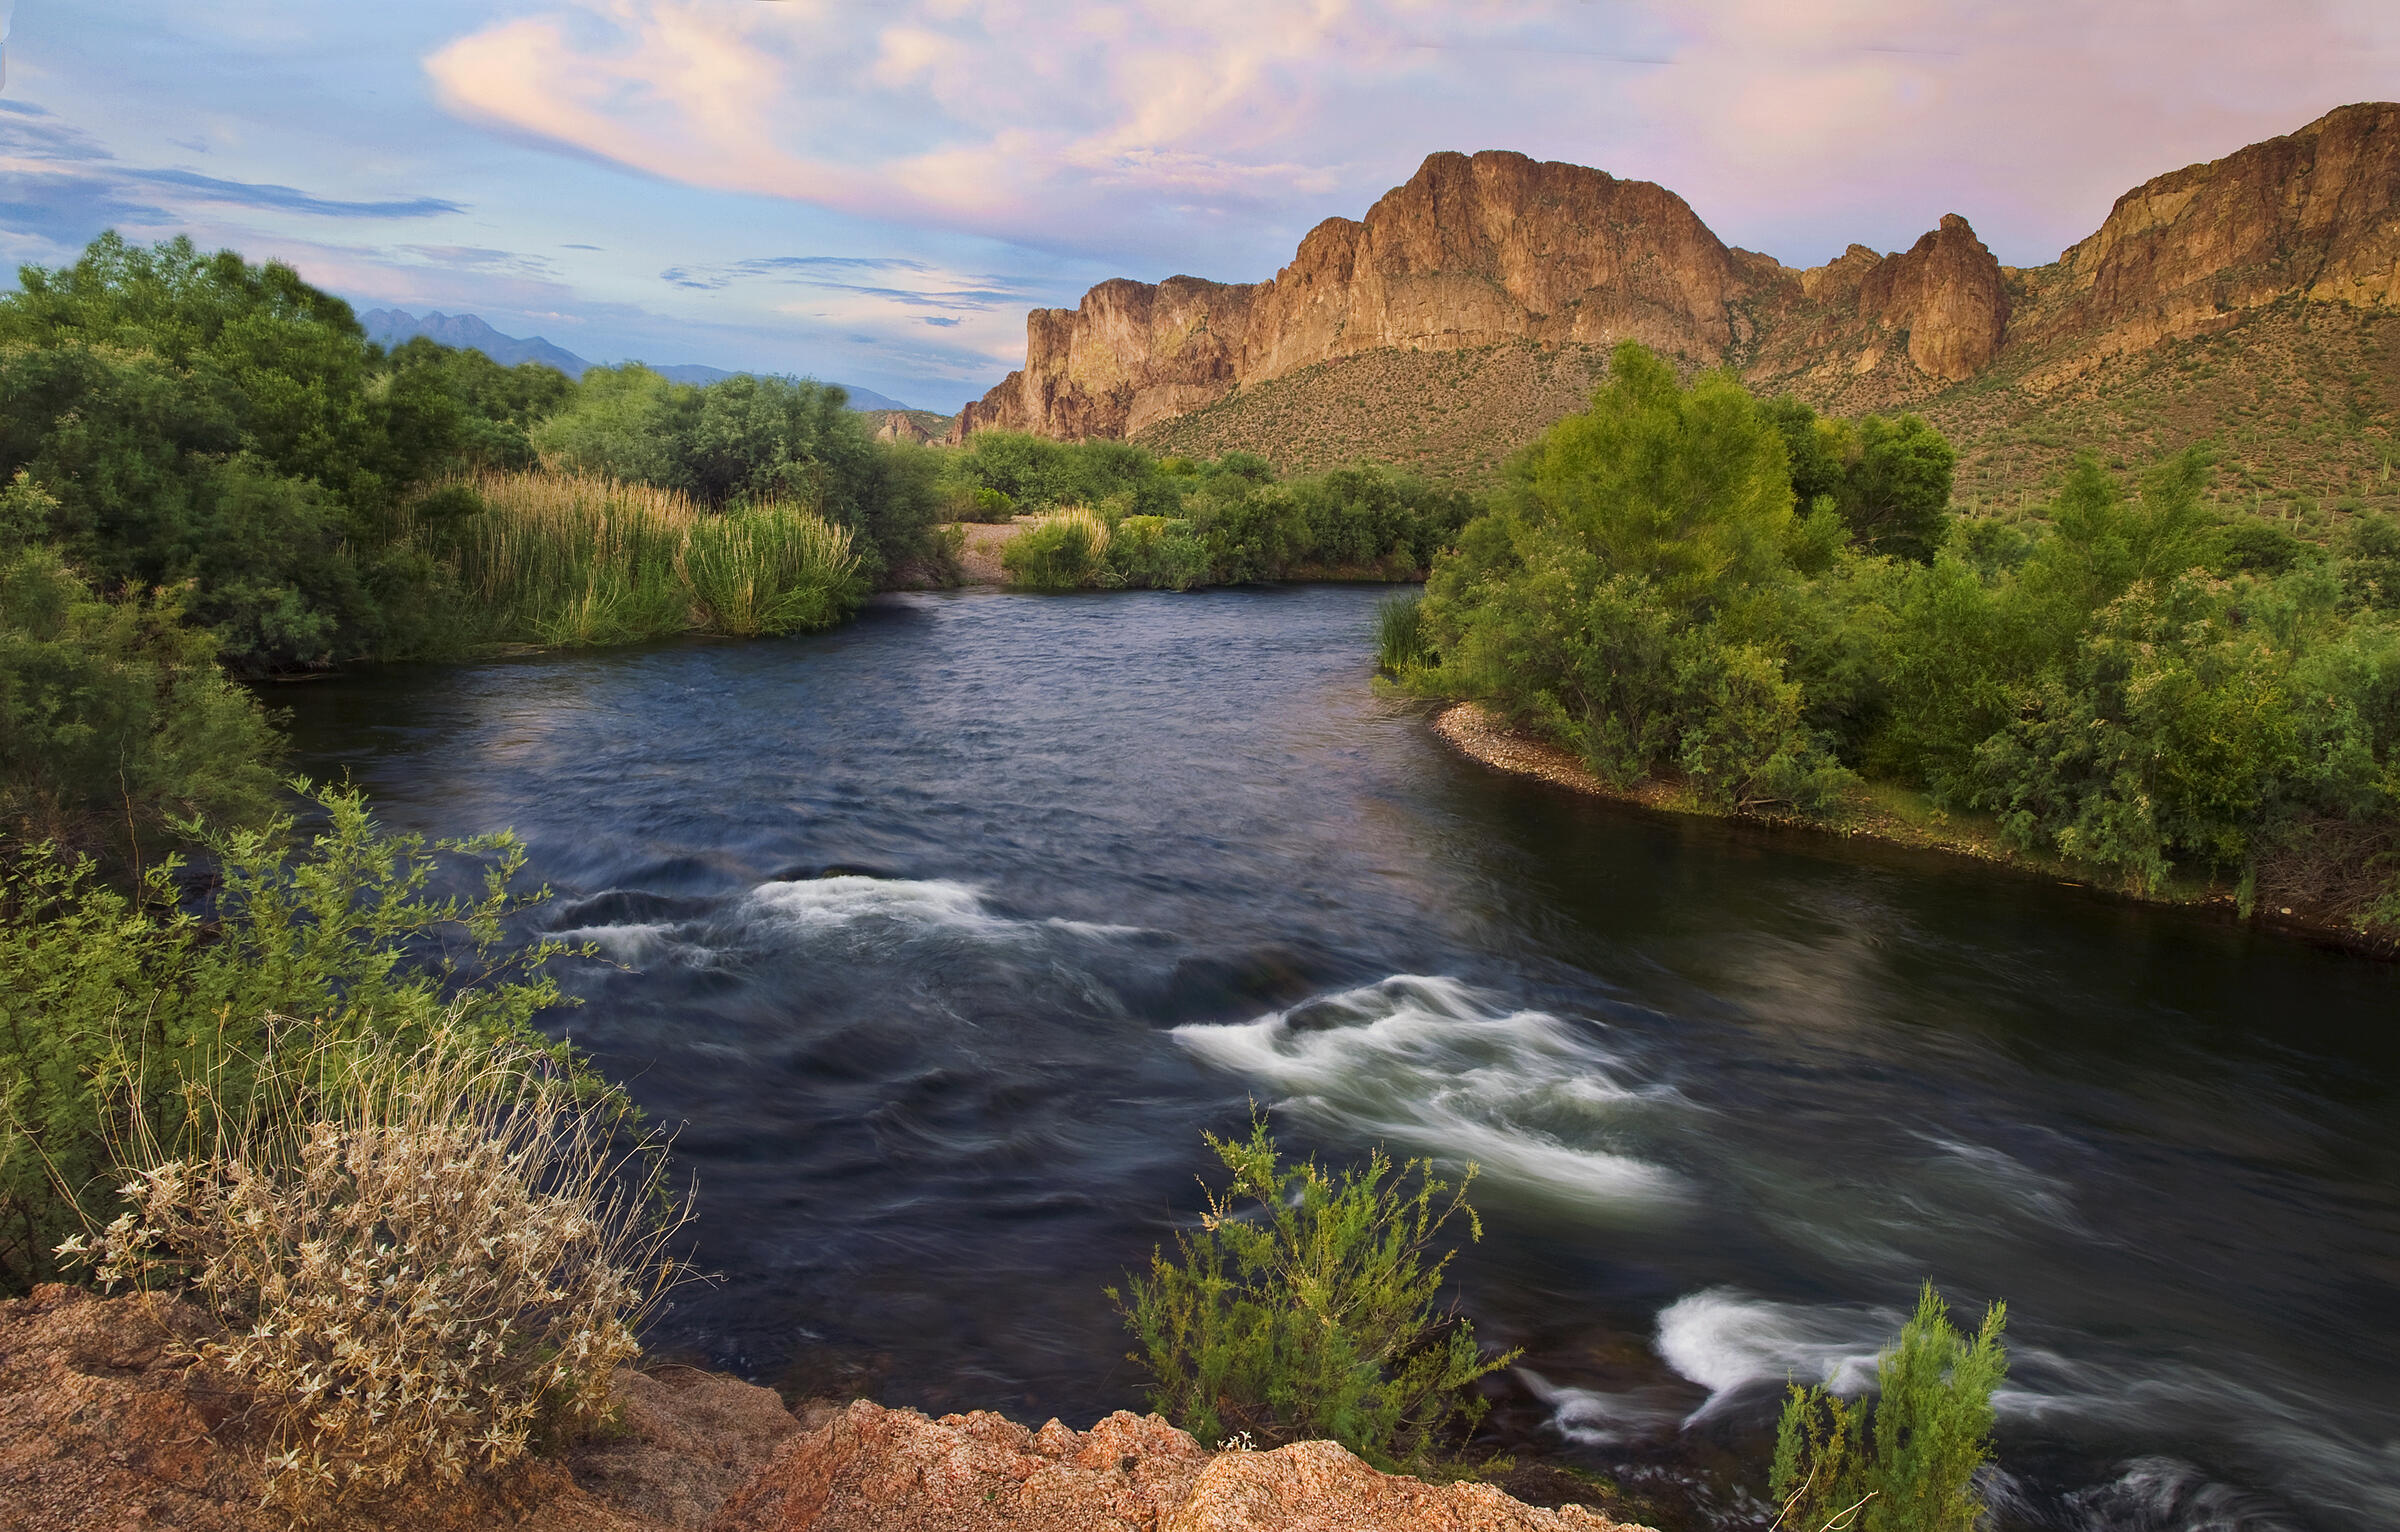 A slow exposure exaggerates the ripples of the deep blue Salt River against a backdrop of green trees, cattails, and the rugged cliff faces of the Goldfield Mountains.